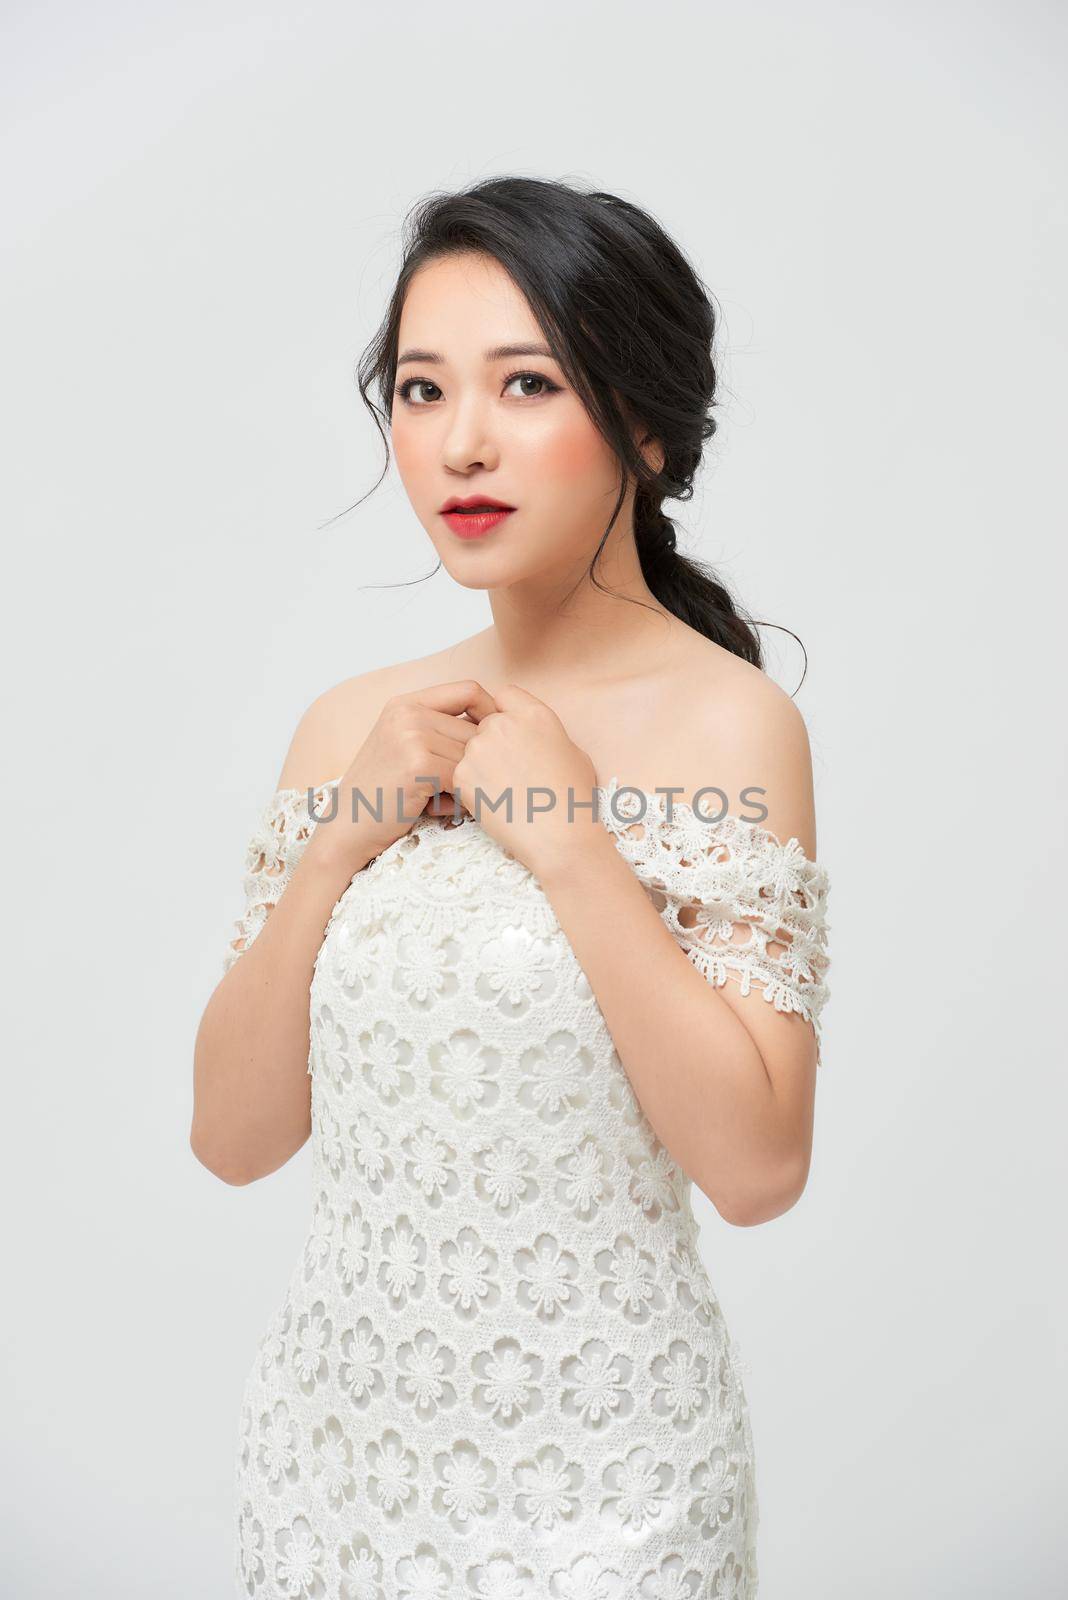 A beautiful girl with great figure in the white lace wedding dress by makidotvn